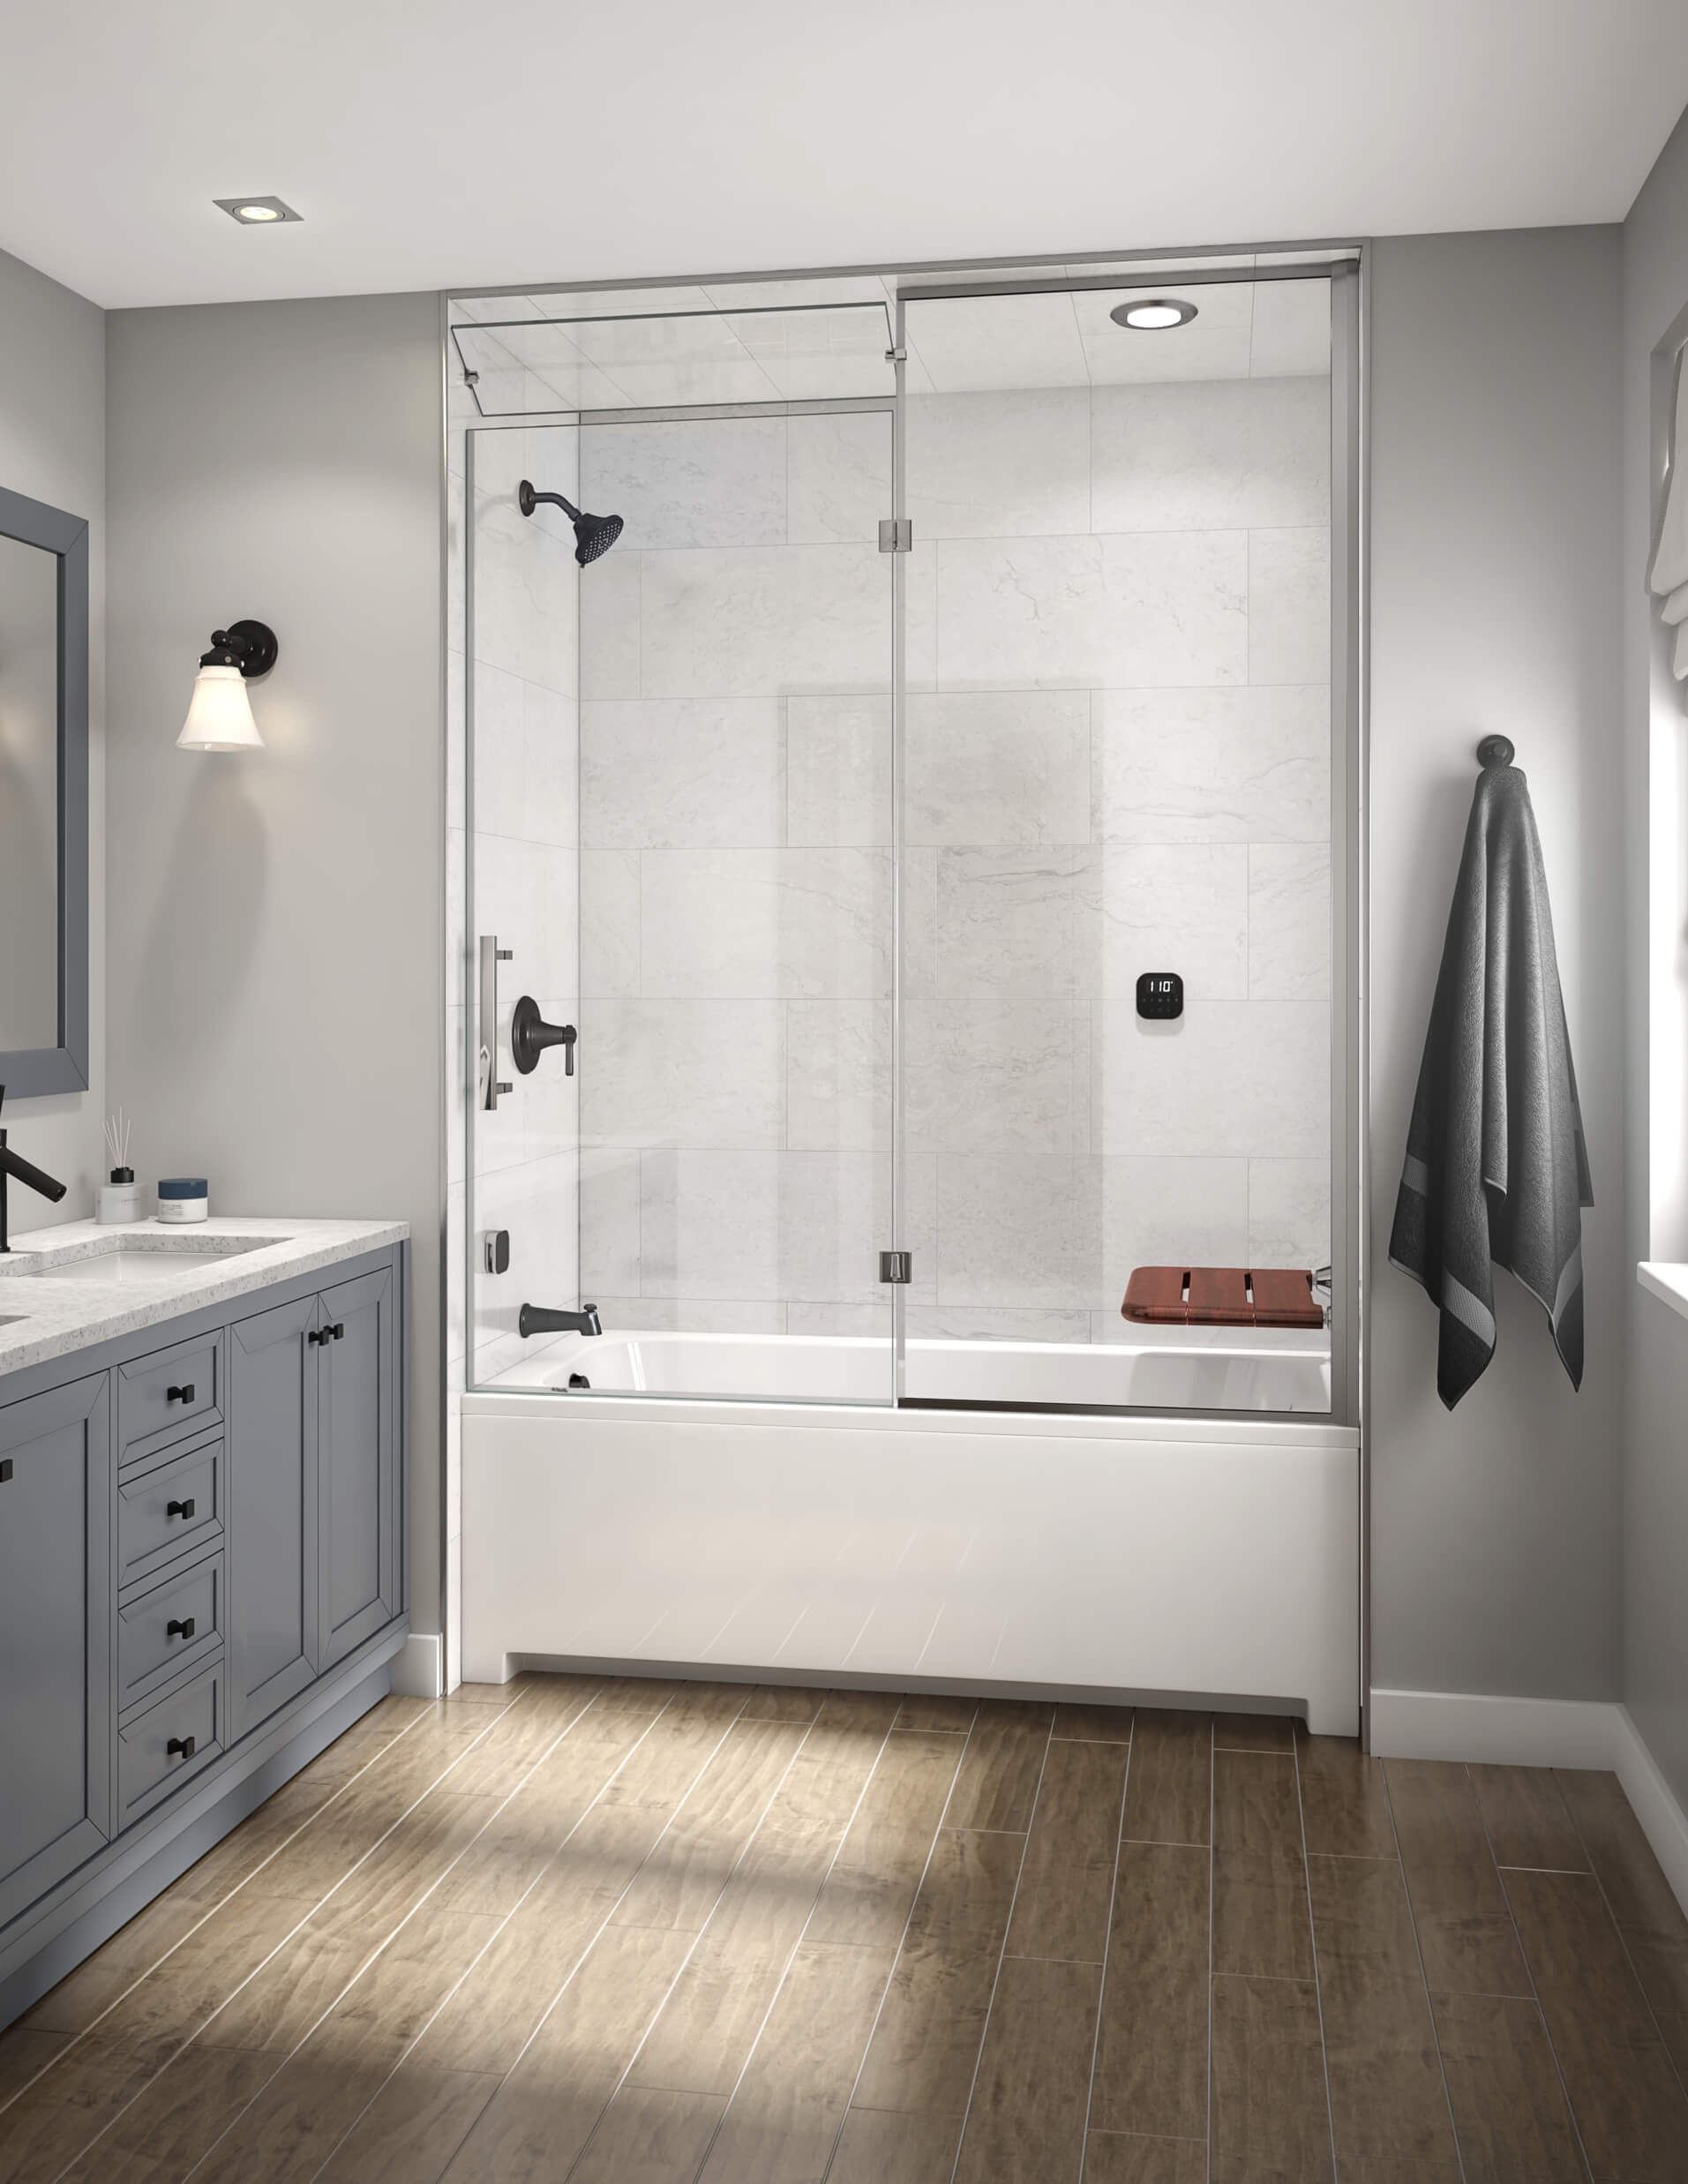 5 Reasons to Choose a Steam Shower from MrSteam